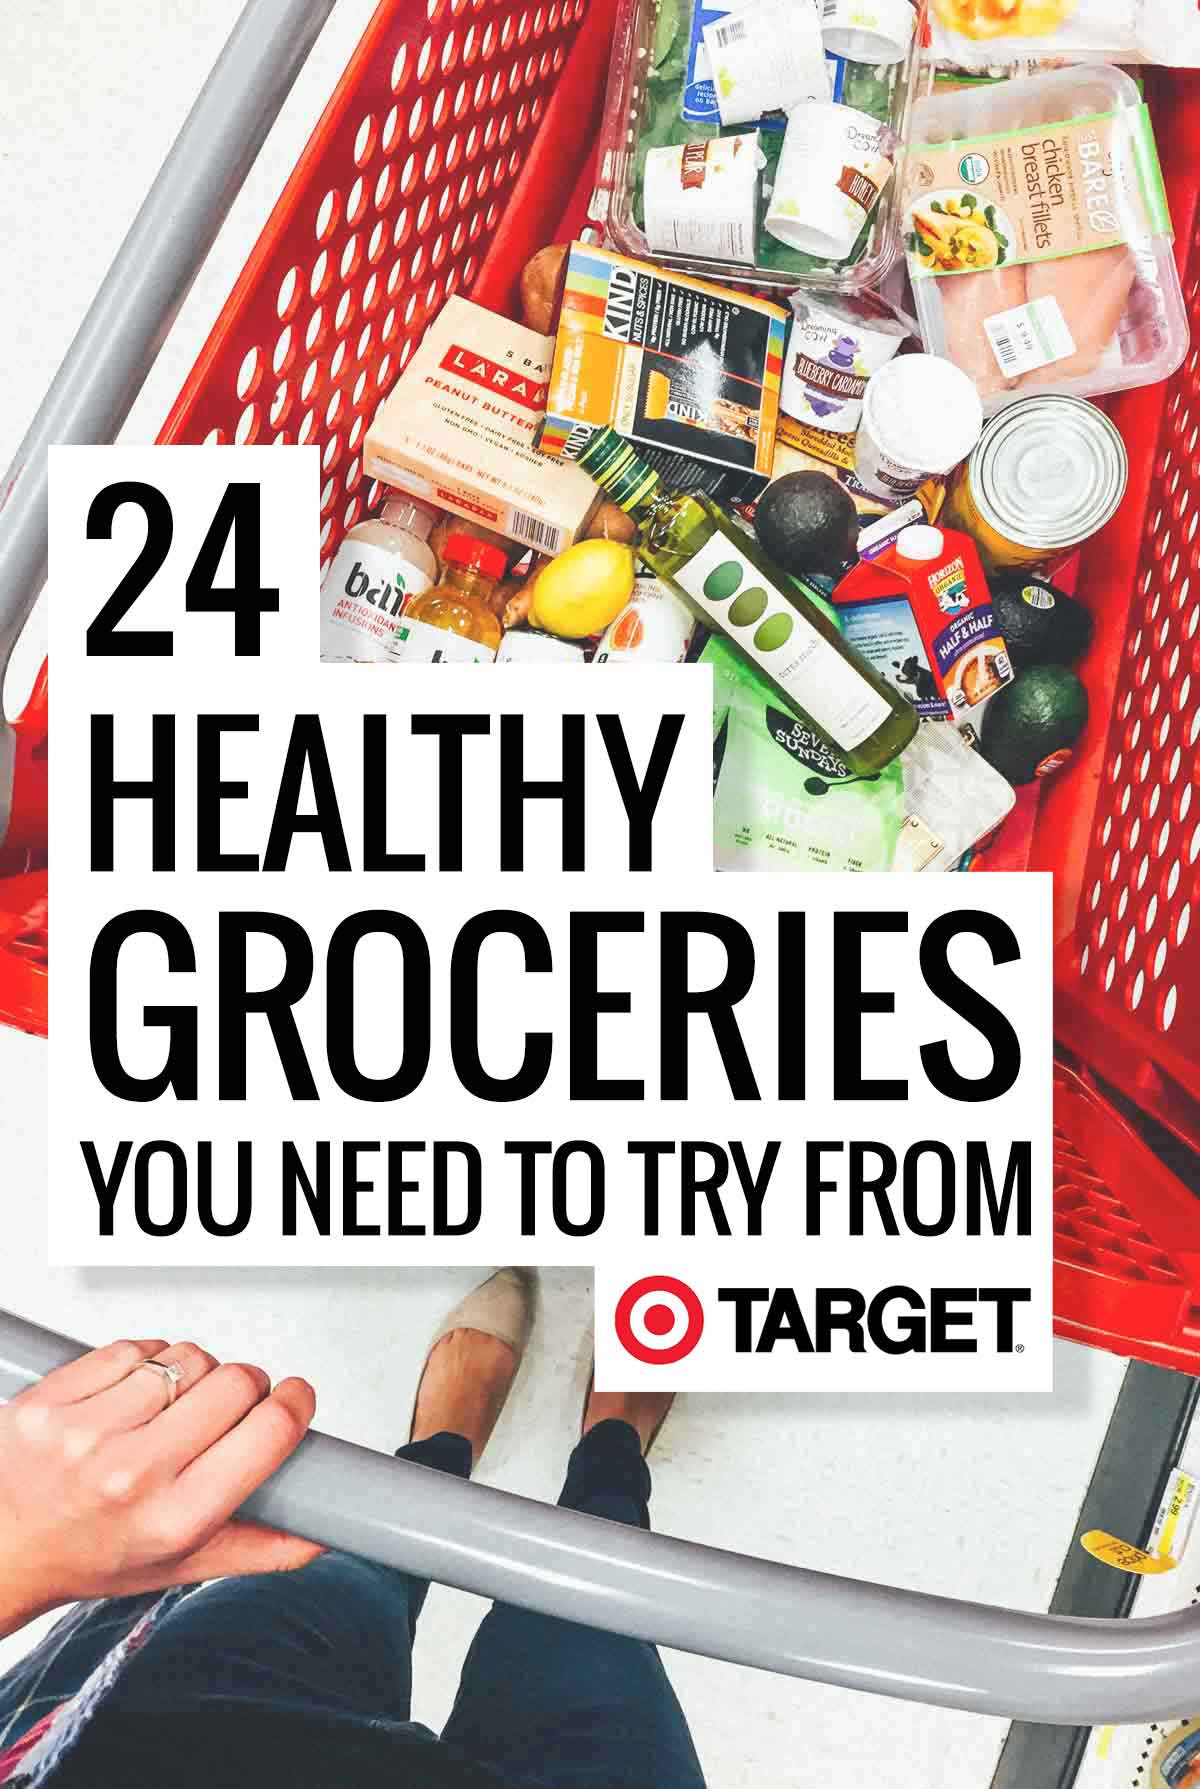 Healthy Snacks To Buy From The Supermarket
 24 Healthy Groceries You Need To Try From Tar Pinch